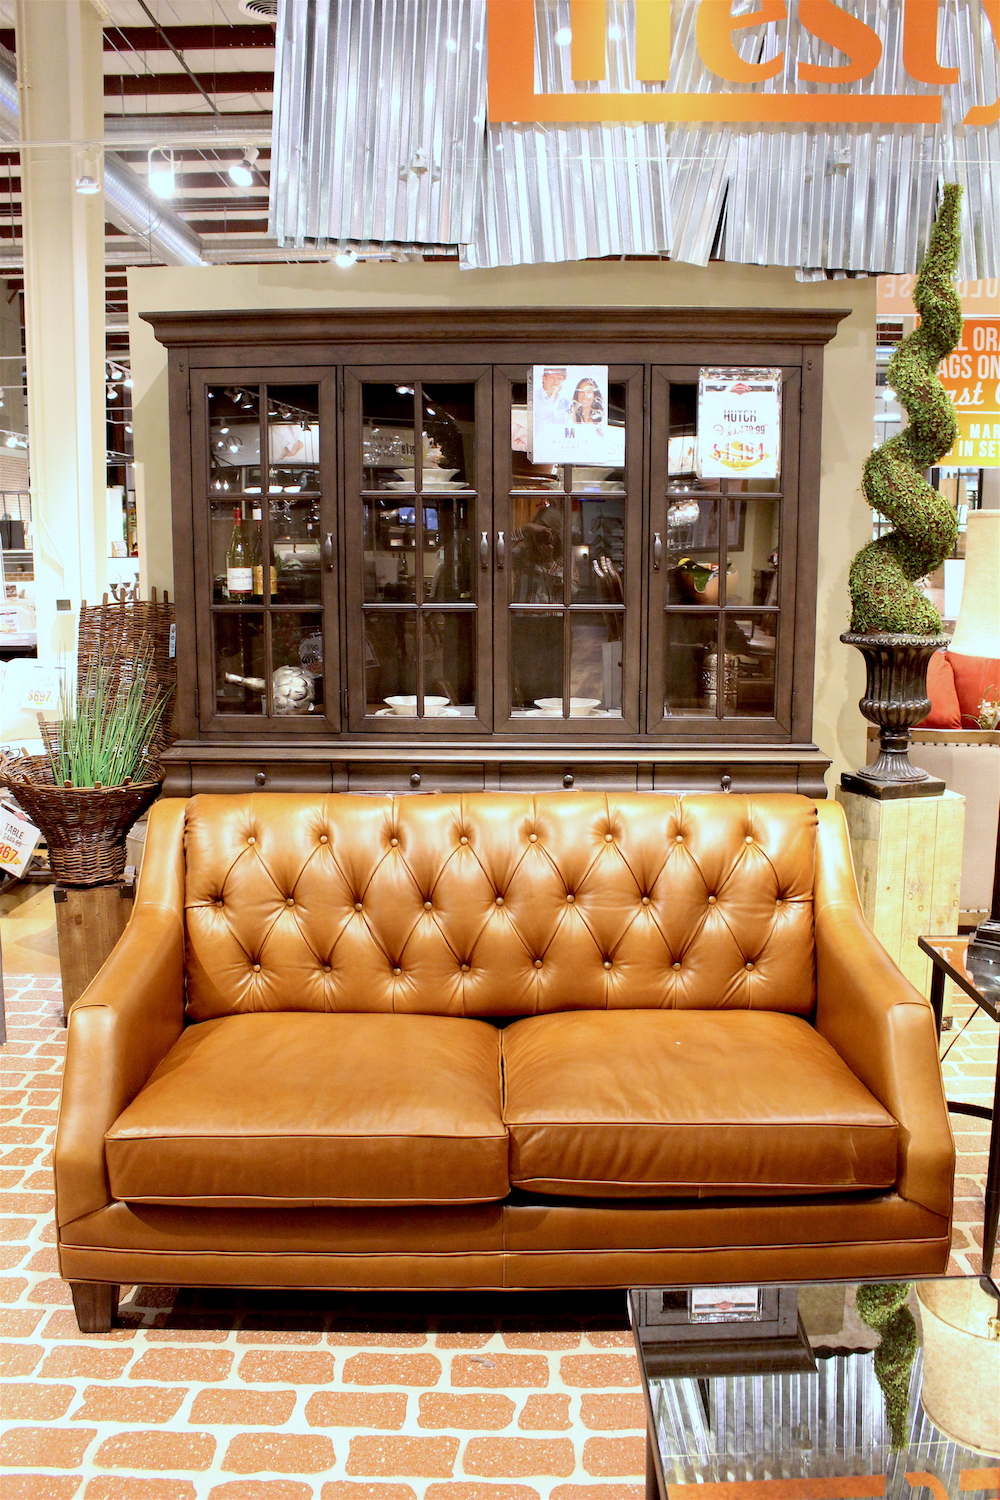 Underpriced Furniture Atlanta Review 3 Peachfully Chic